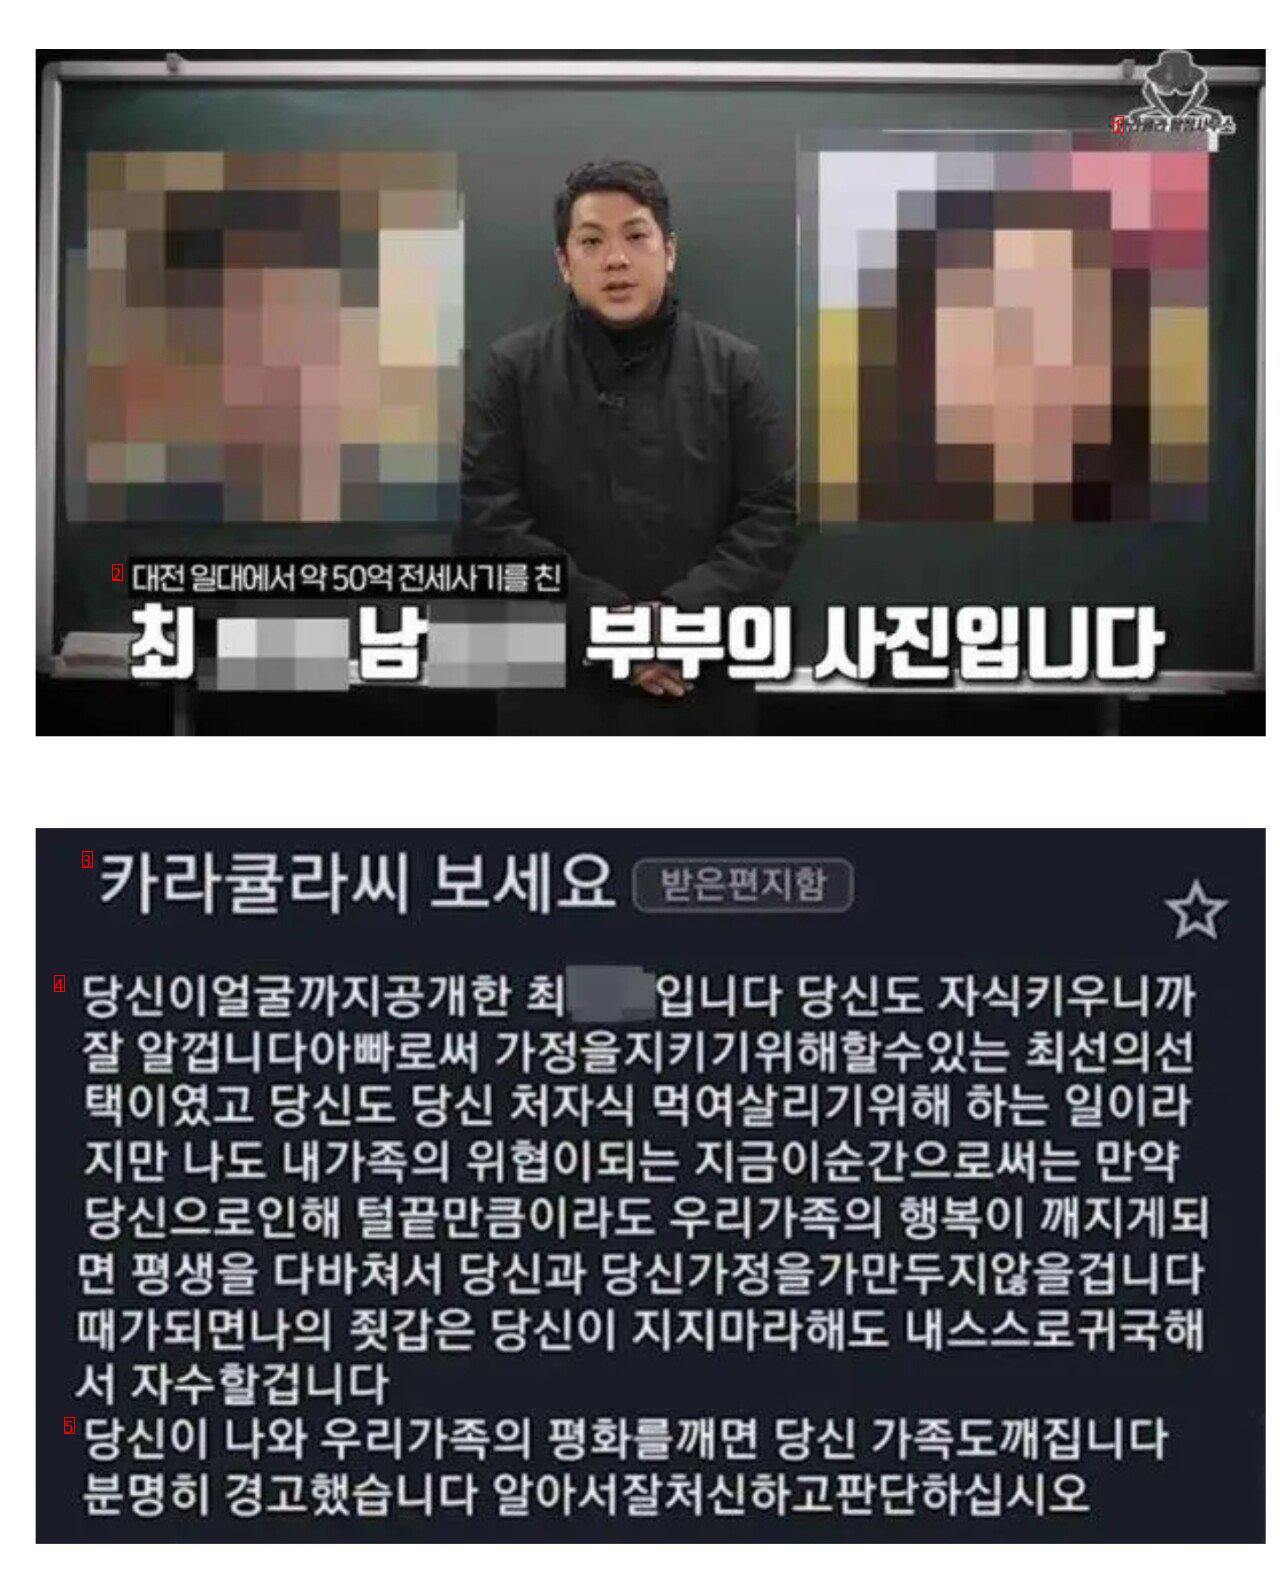 What's up with the YouTube channel that revealed the personal information of the jeonse fraudster? JPG